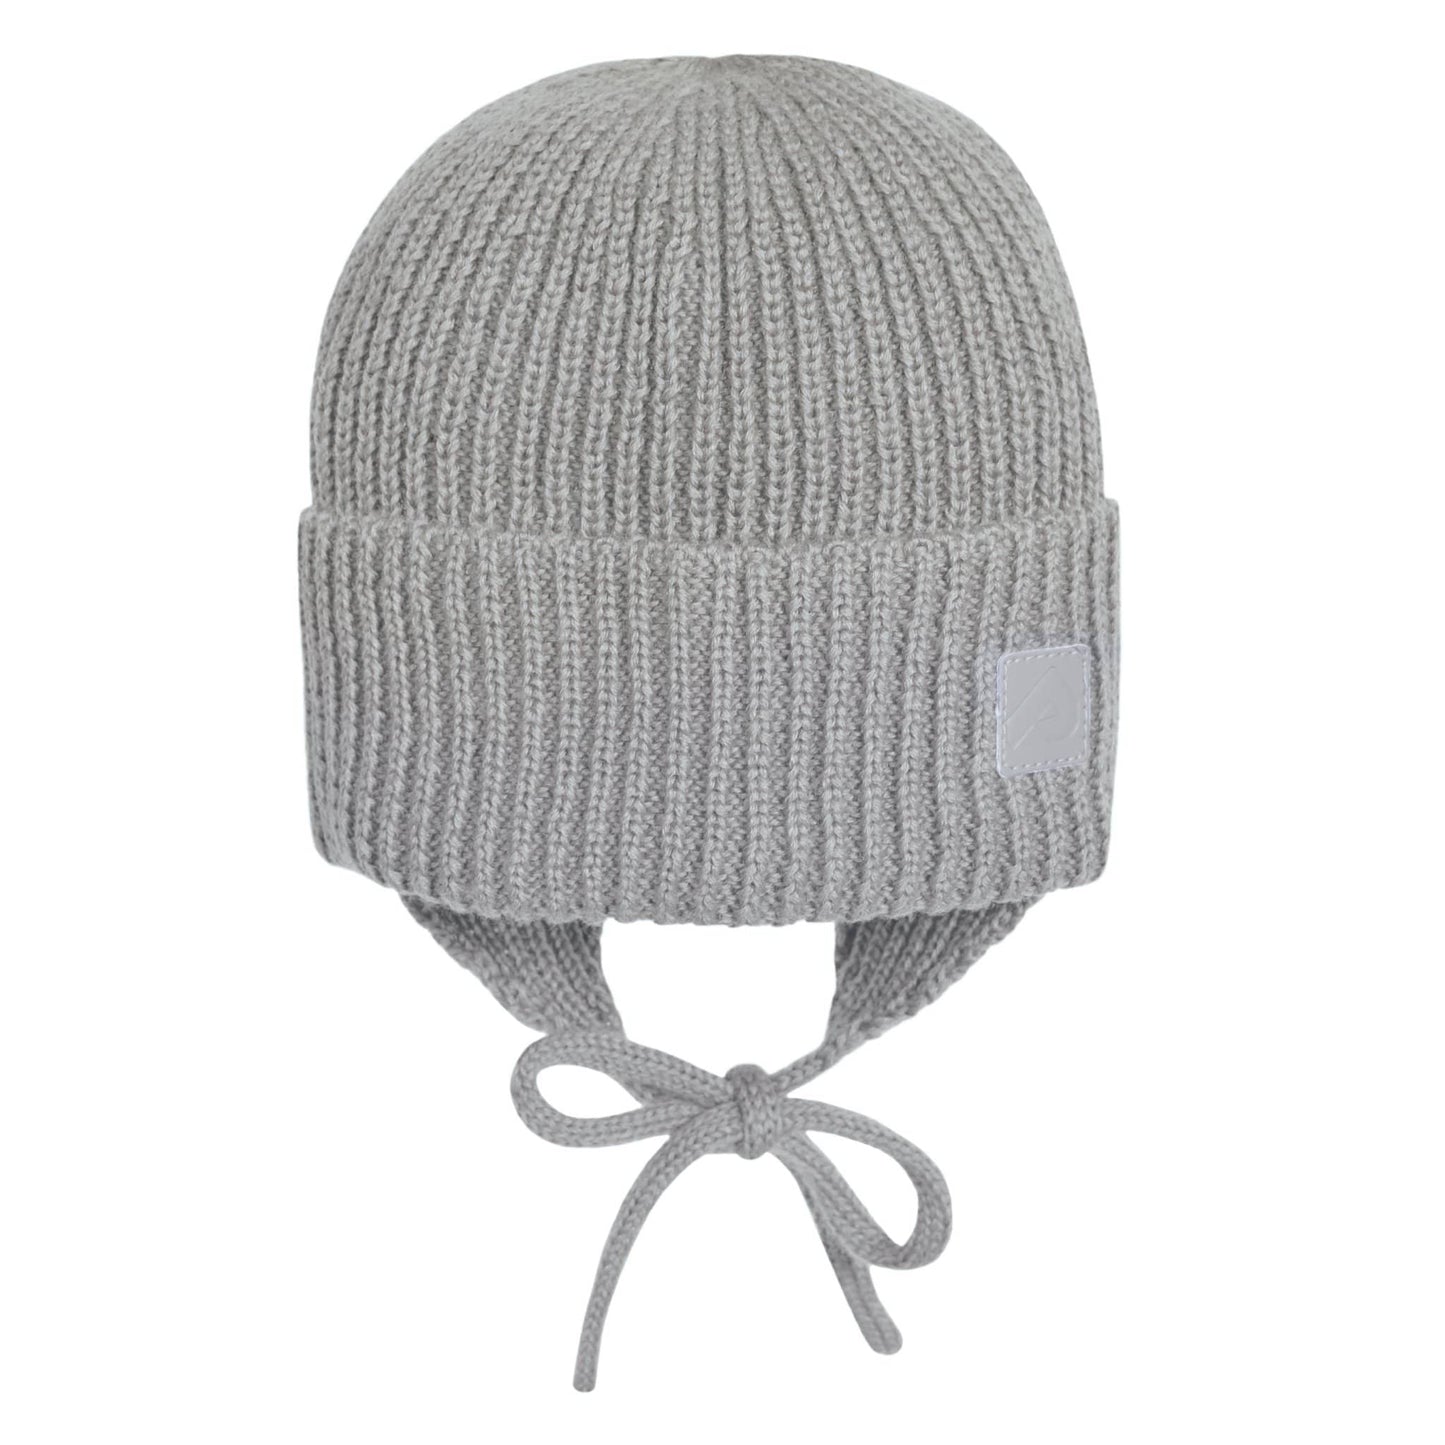 Acrylic hat with ear covers - Grey light